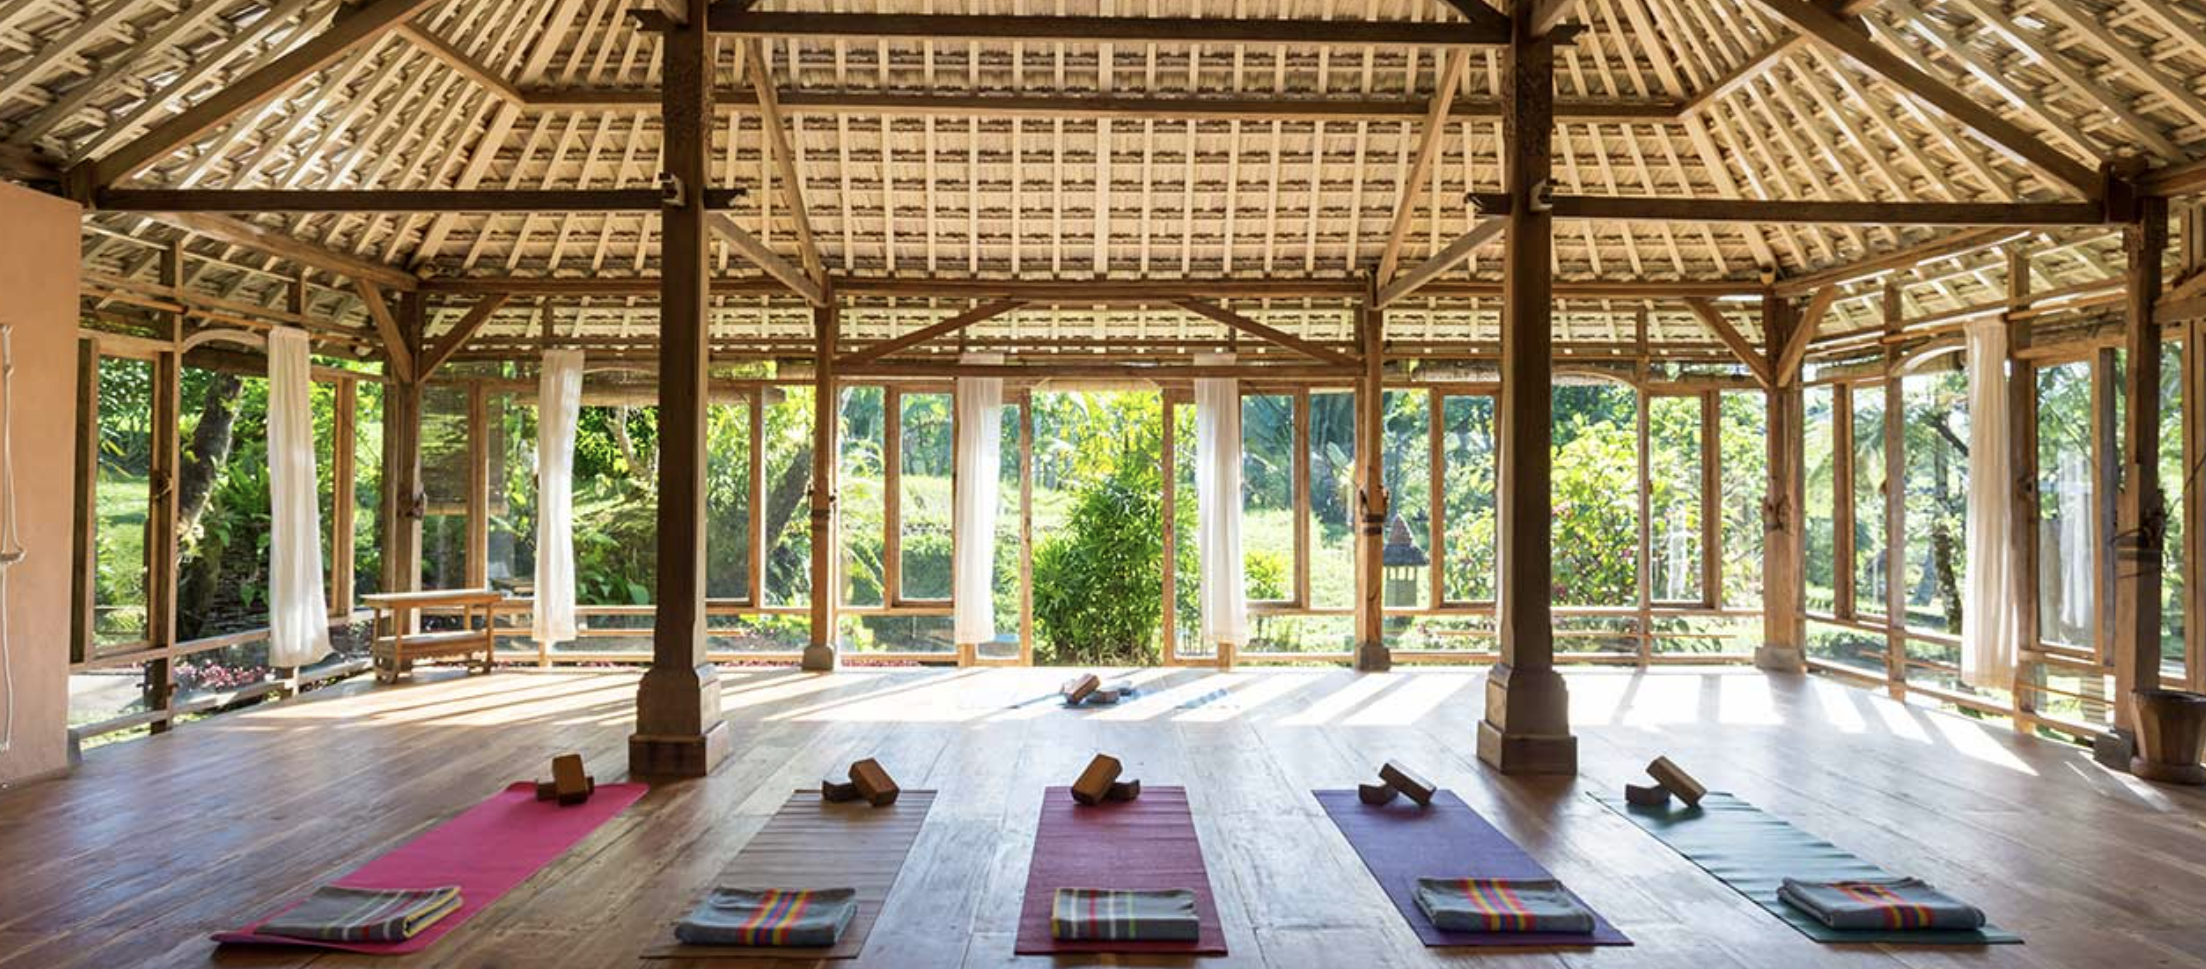 The Best Yoga Studios in Jakarta and Bali